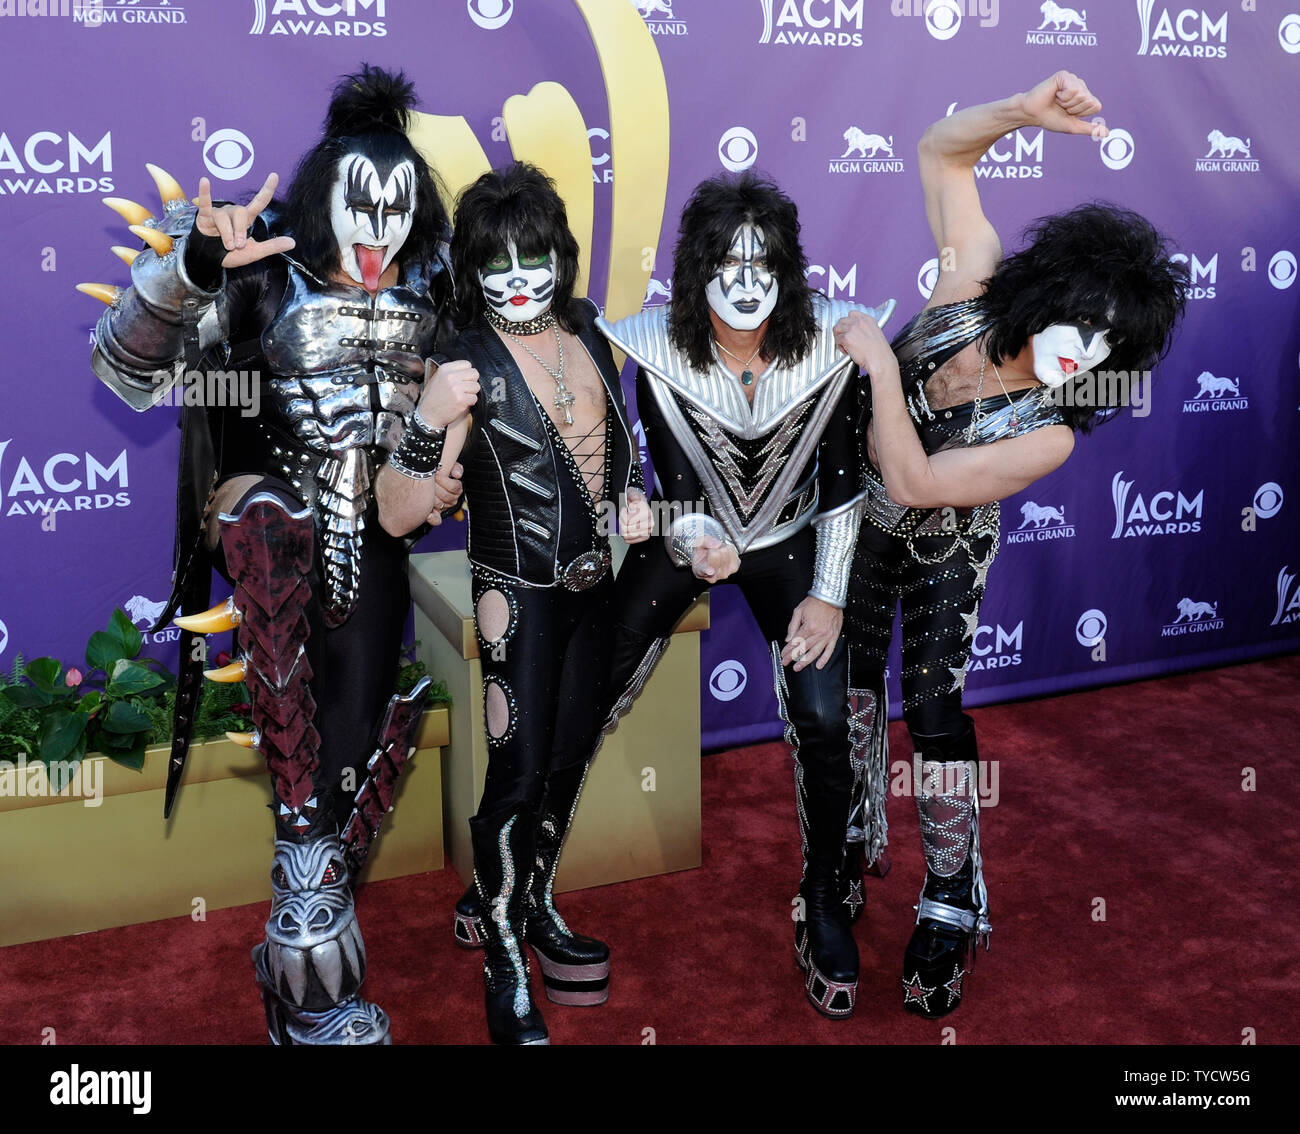 (L-R) Musicians Gene Simmons, Eric Singer, Tommy Thayer and Paul Stanley of the band KISS arrive at the 47th annual Academy of Country Music Awards at the MGM Hotel in Las Vegas, Nevada on April 1, 2012.  UPI/David Becker Stock Photo